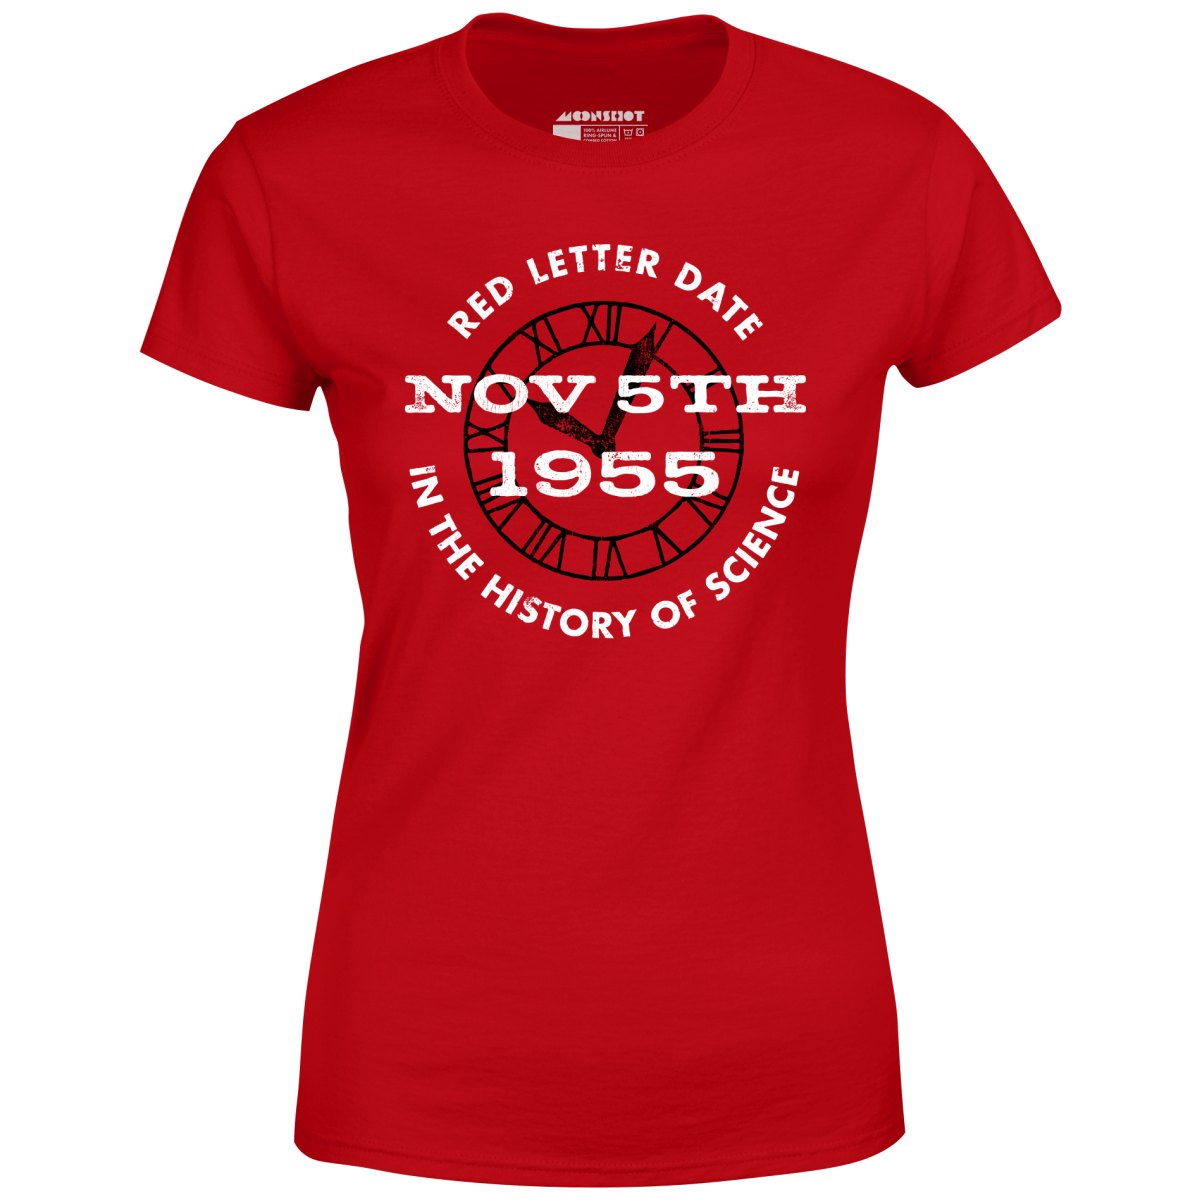 November 5th 1955 - Red Letter Date in the History of Science - Women's T-Shirt